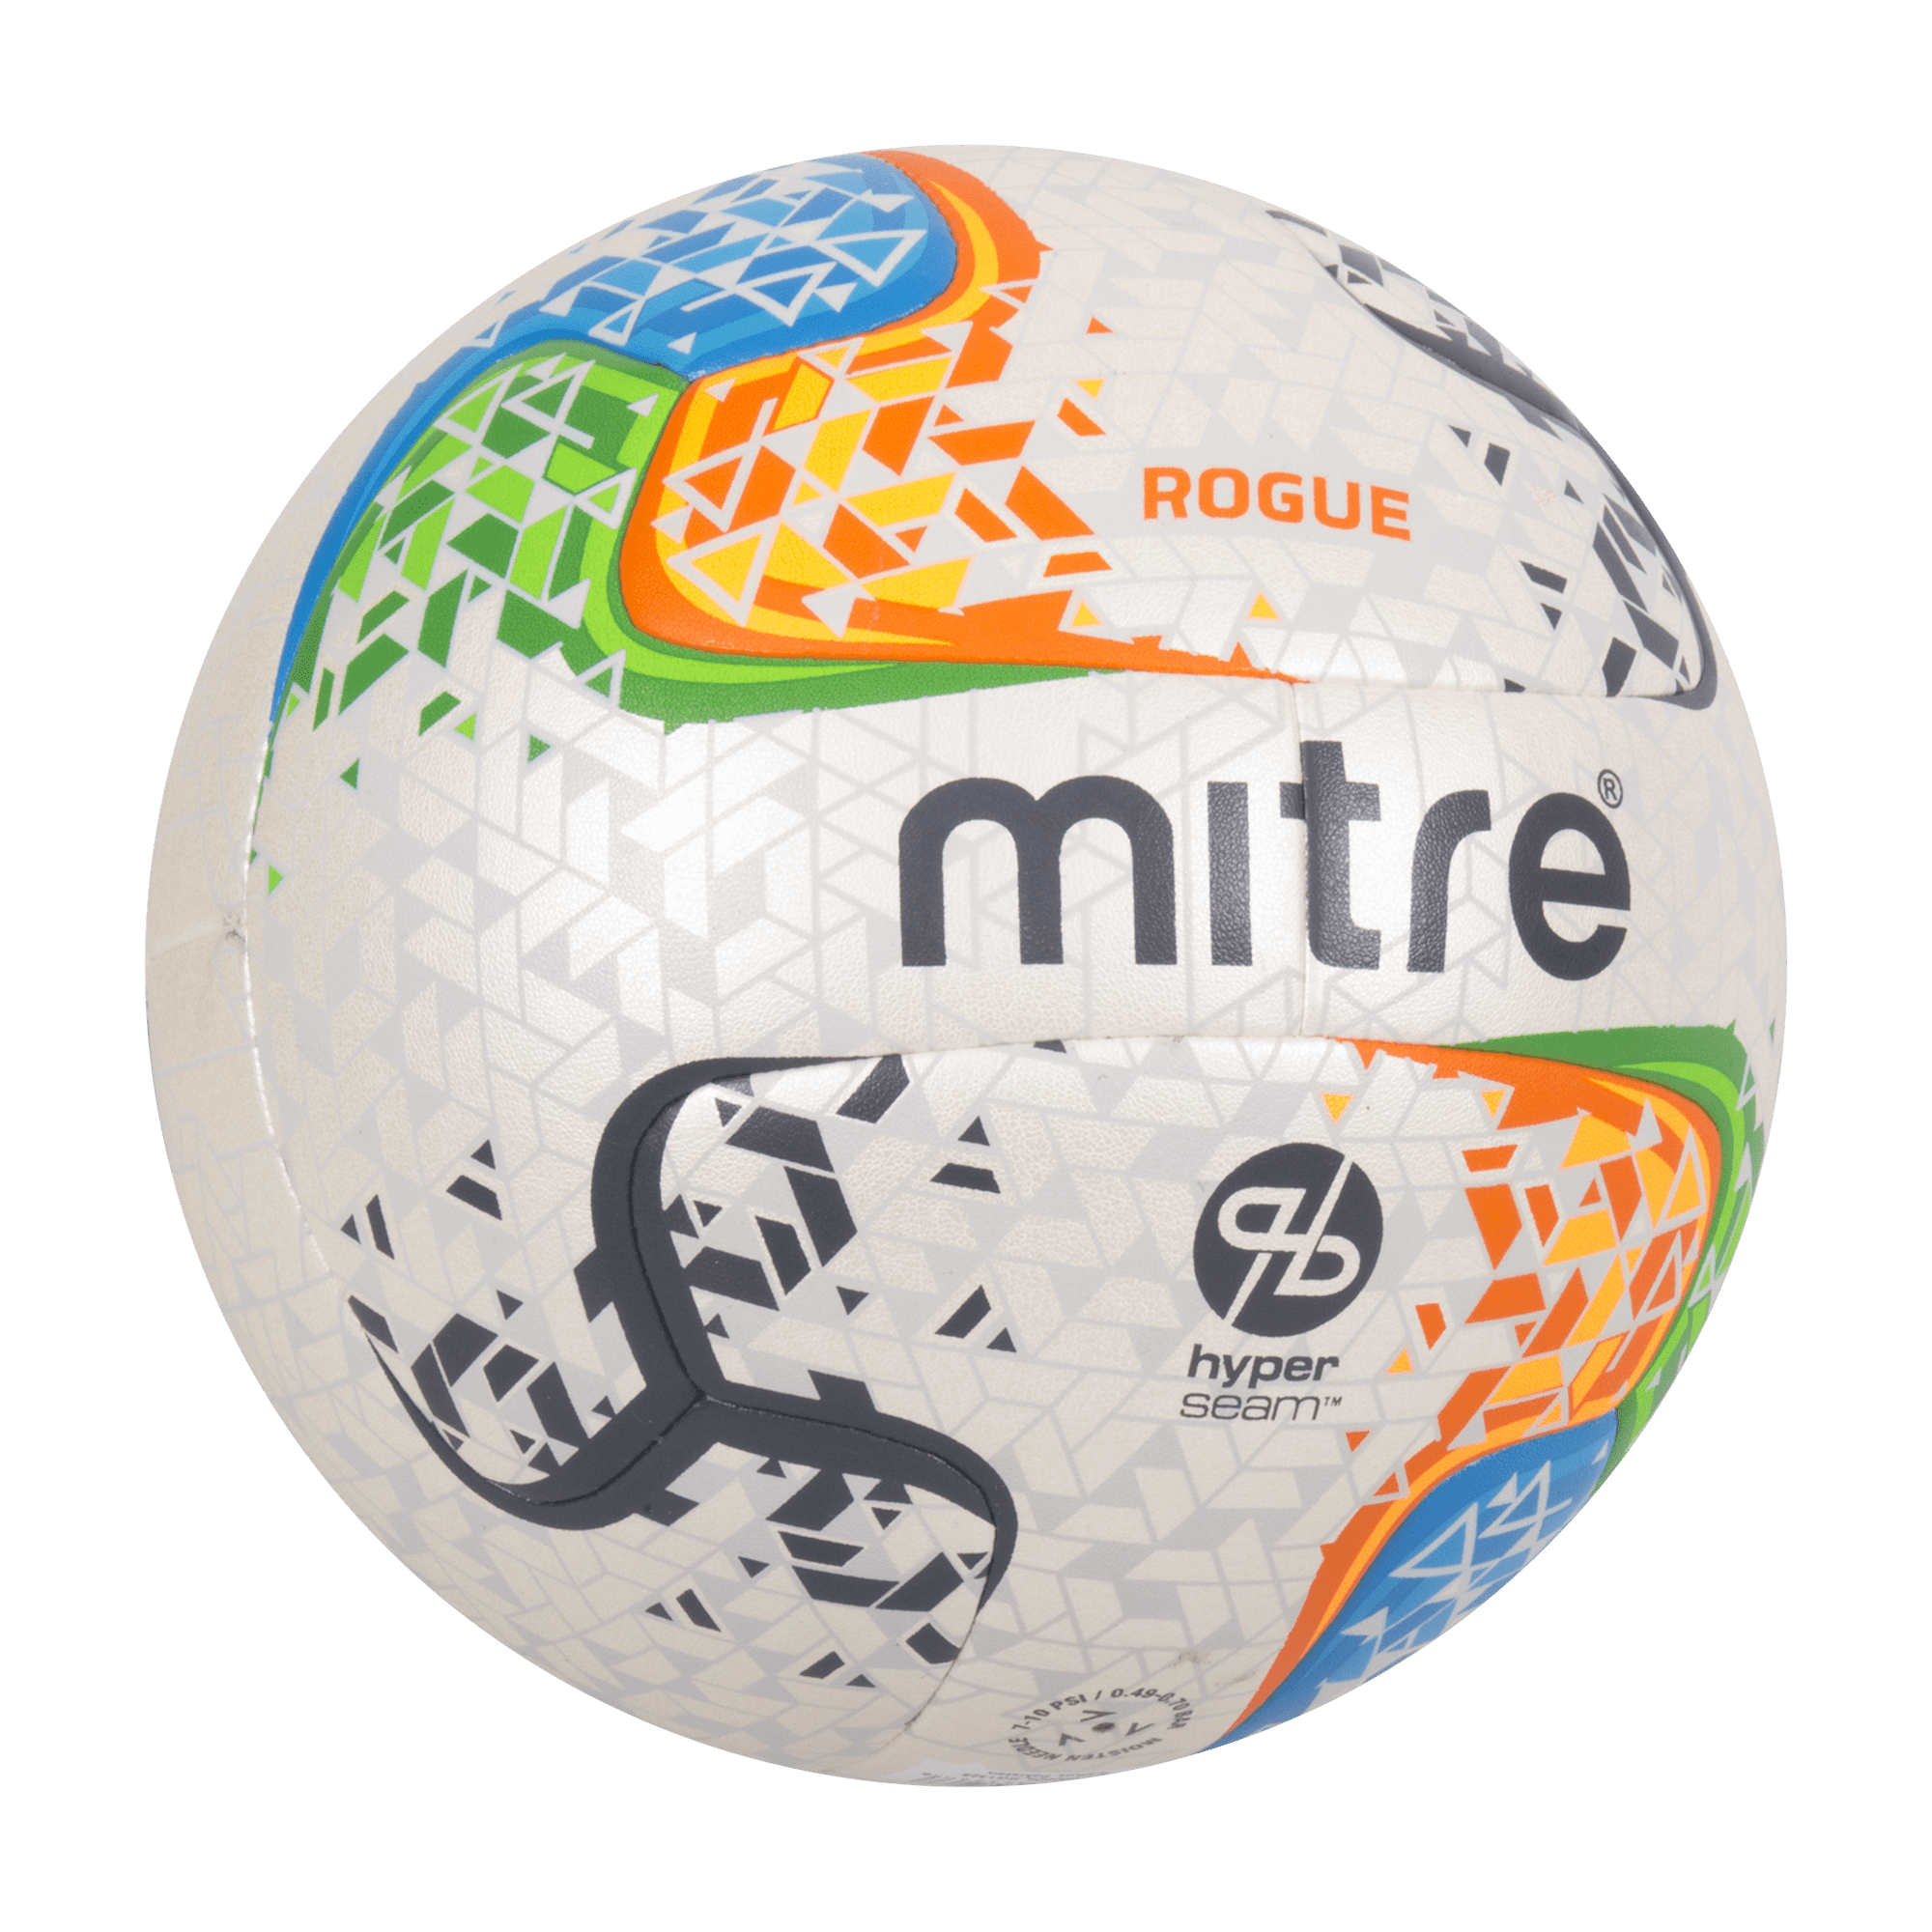 Match Quality Mitre HyperSeam RRP £21.99! Star Wars Edition size 5 